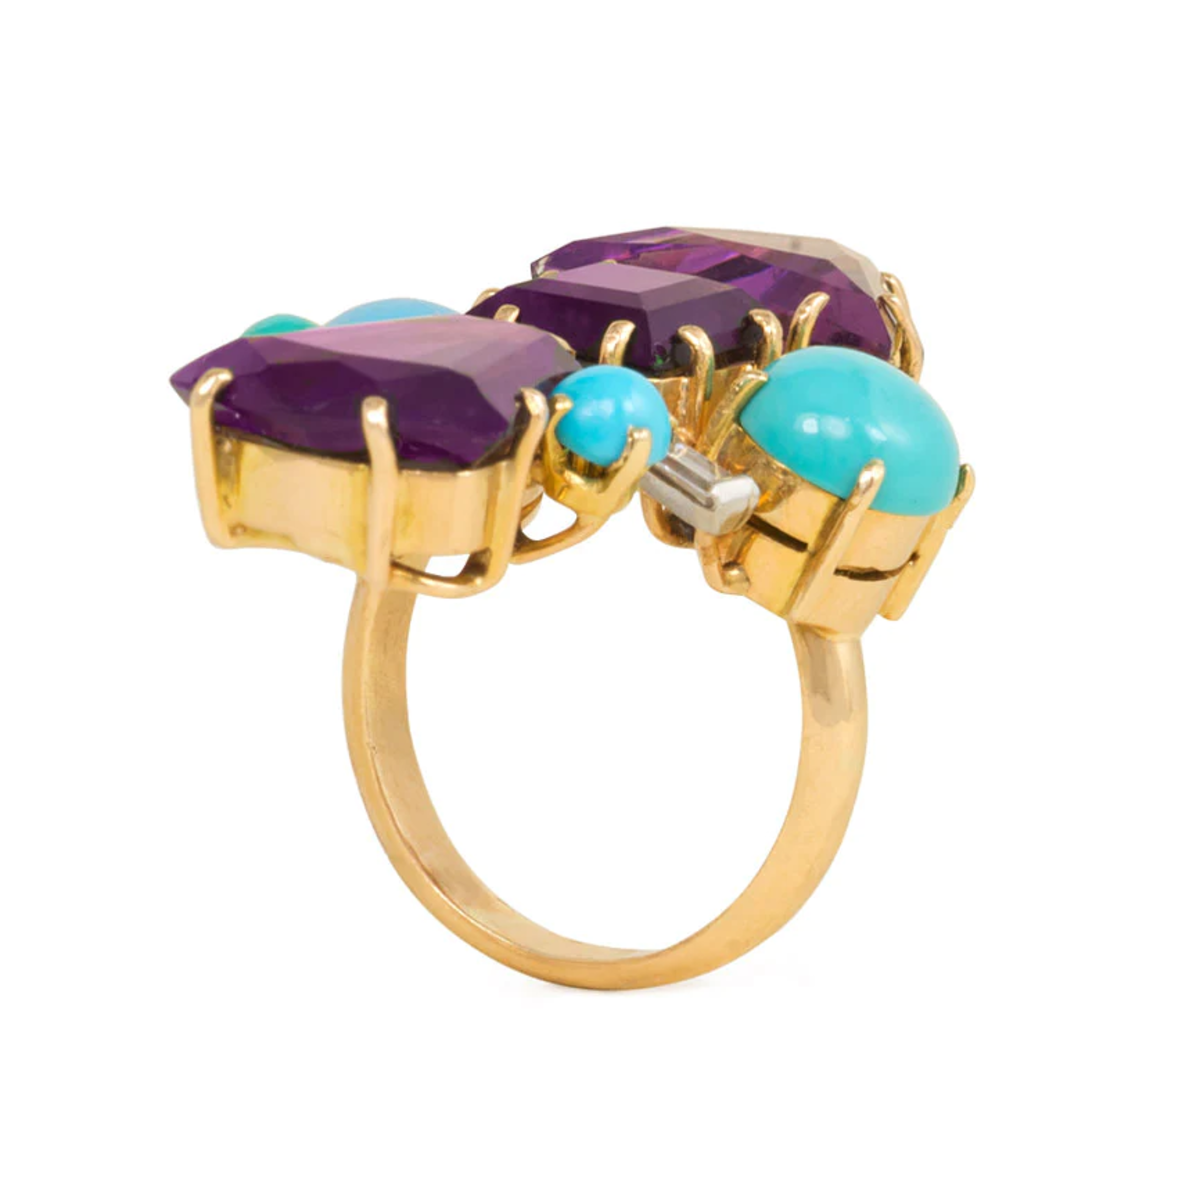 French 1950s 18KT Yellow Gold Amethyst, Diamond & Turquoise Ring top view